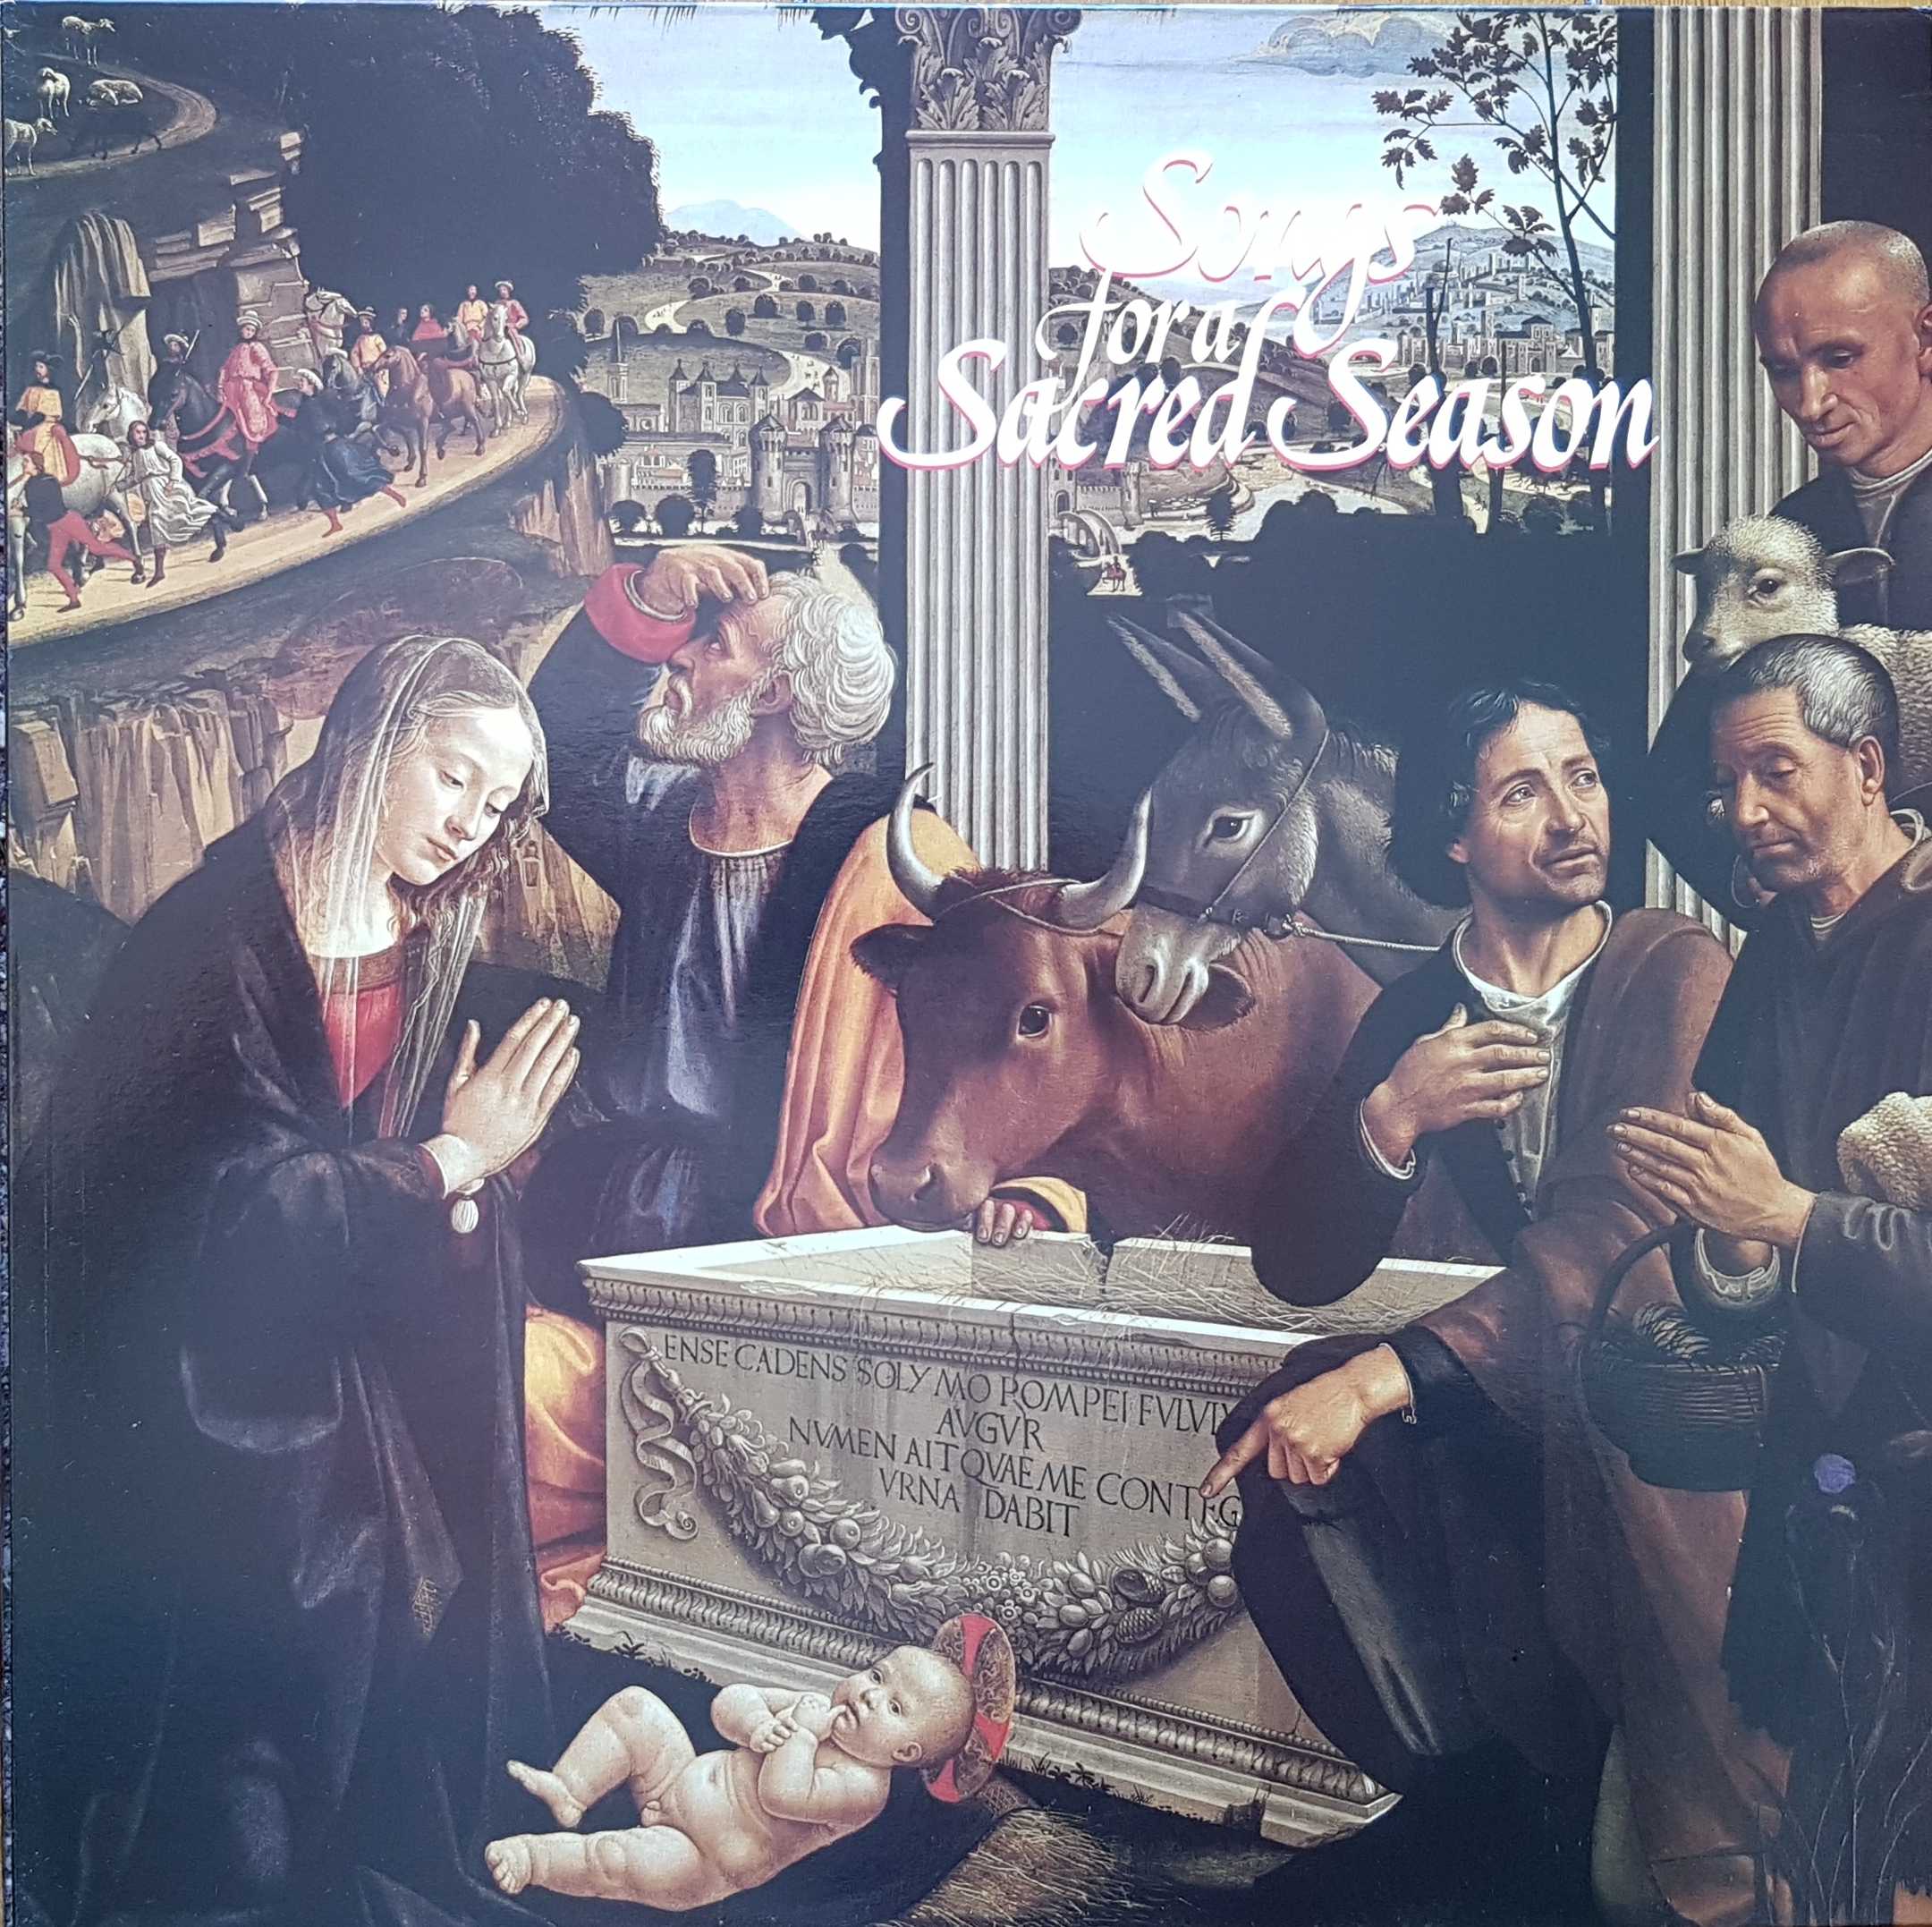 Picture of REB 689 Songs for a sacred season by artist Various from the BBC albums - Records and Tapes library